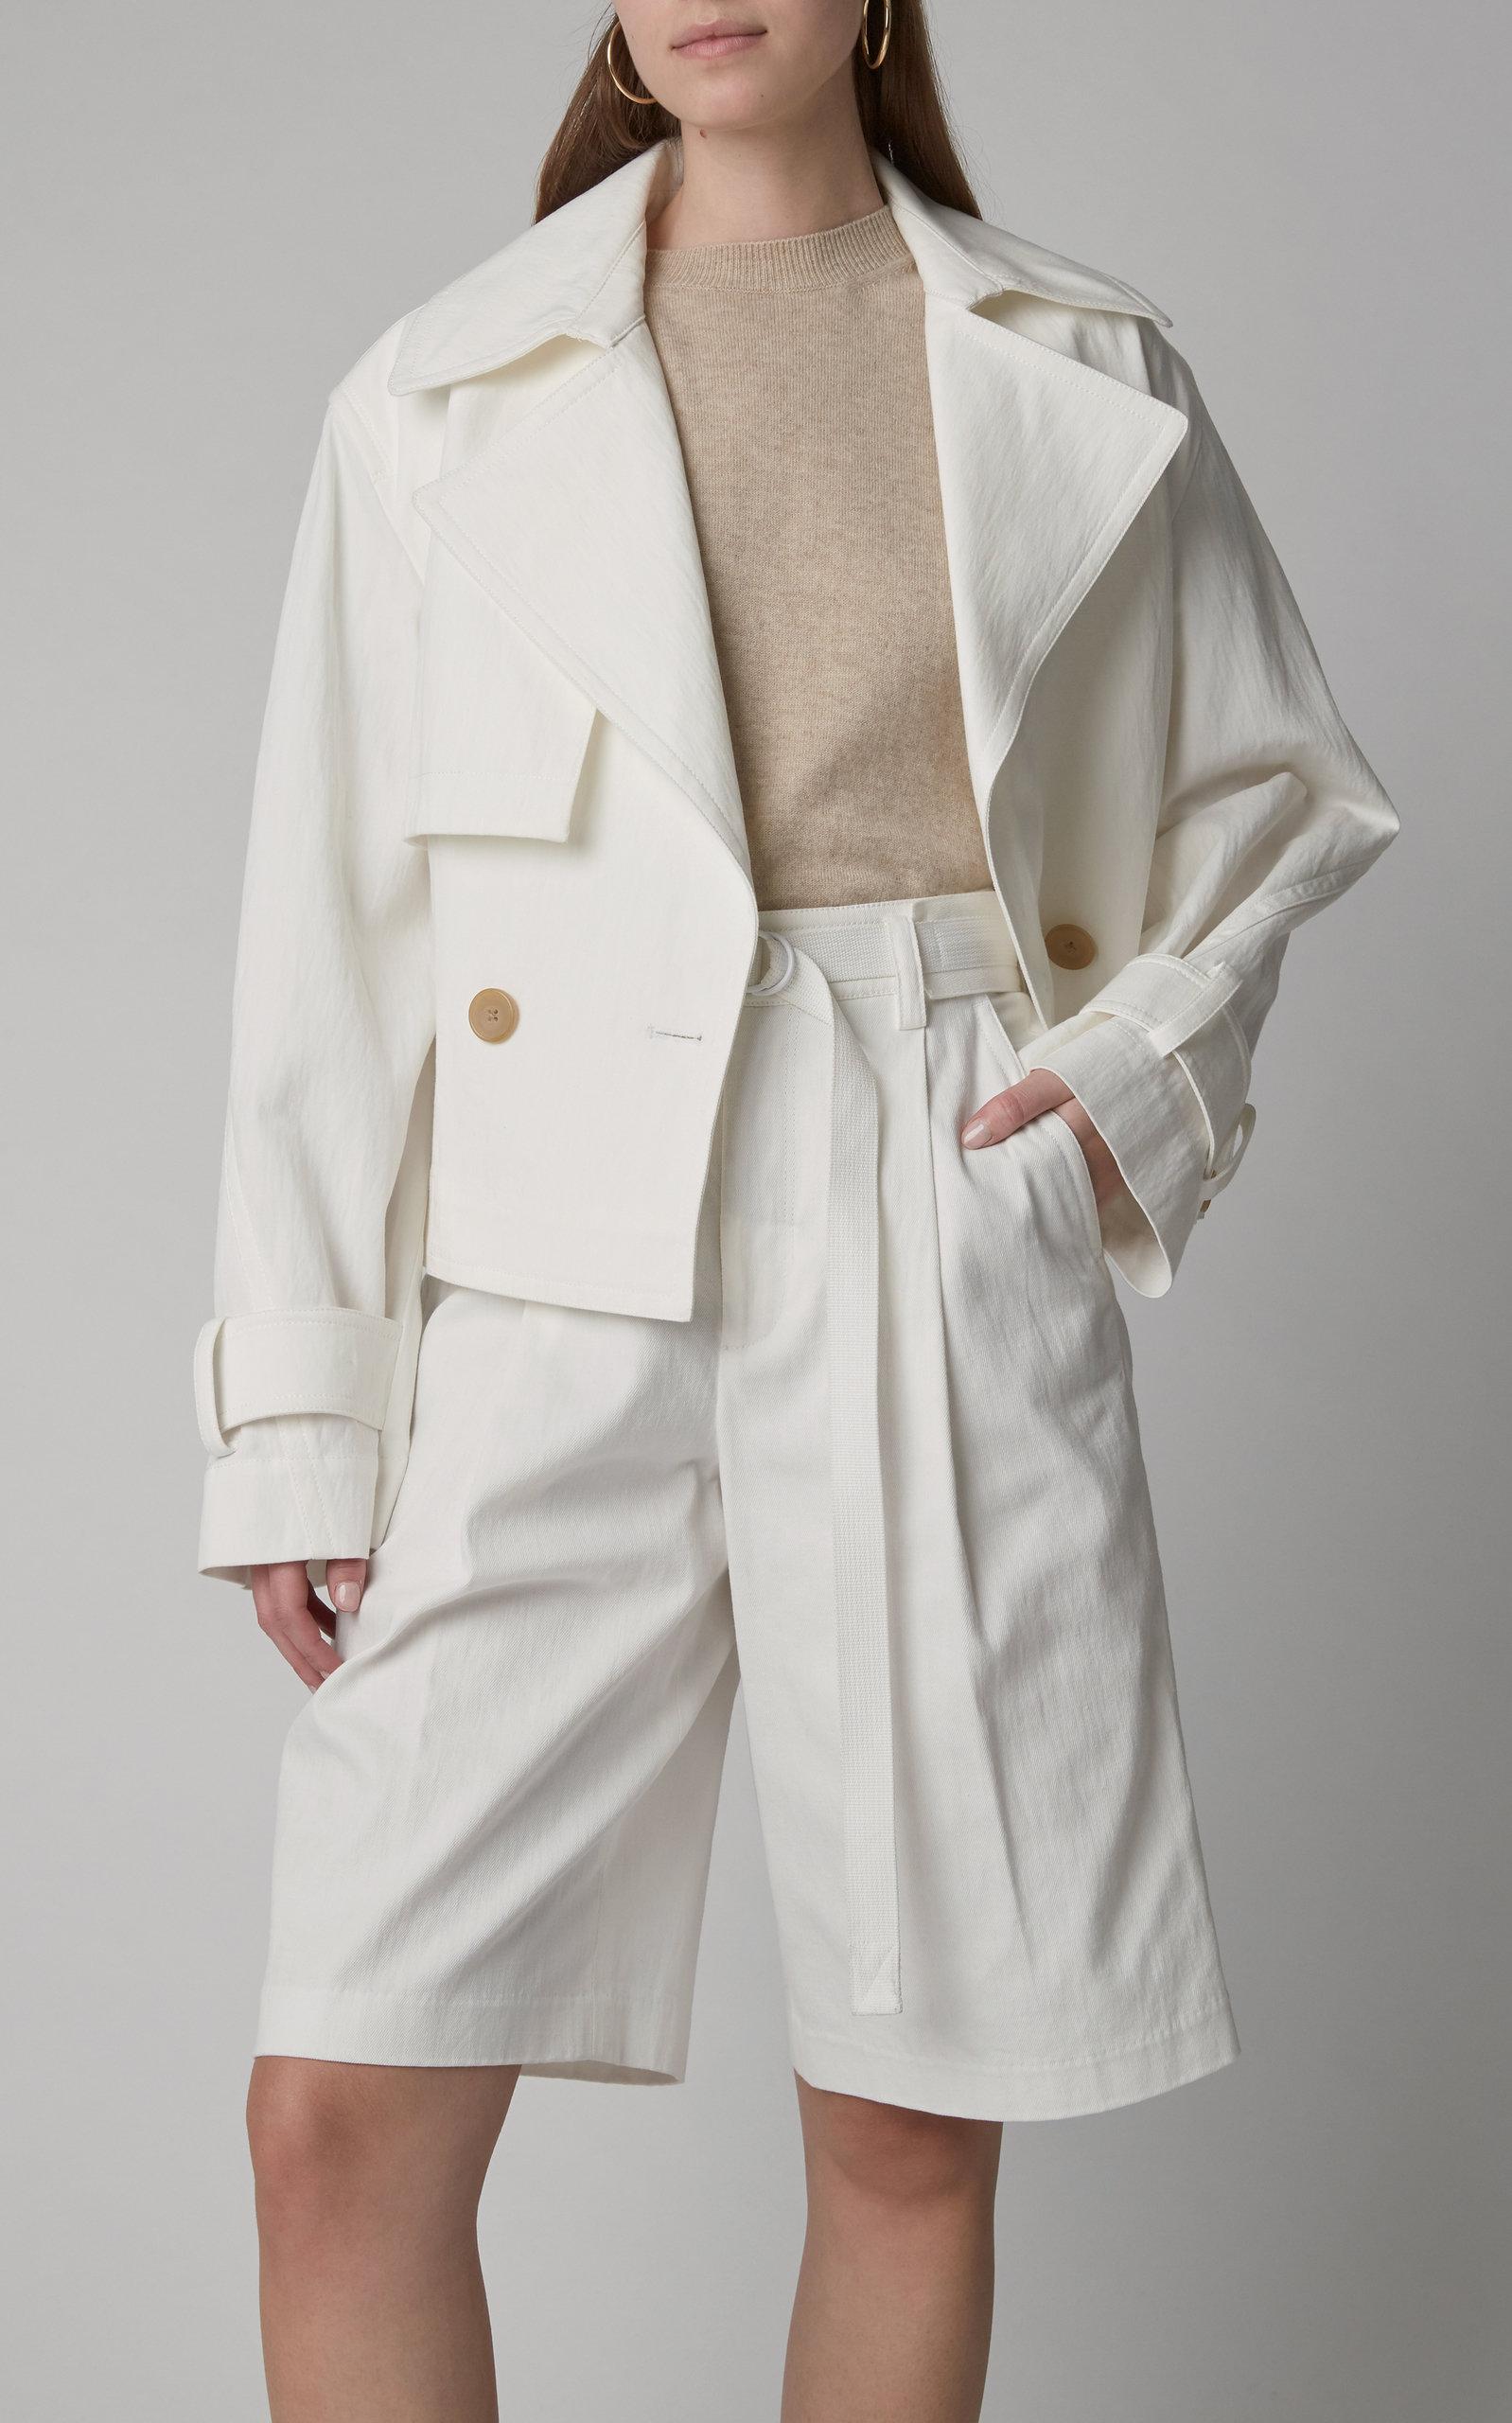 Vince Cropped Belted Linen Jacket in White - Lyst